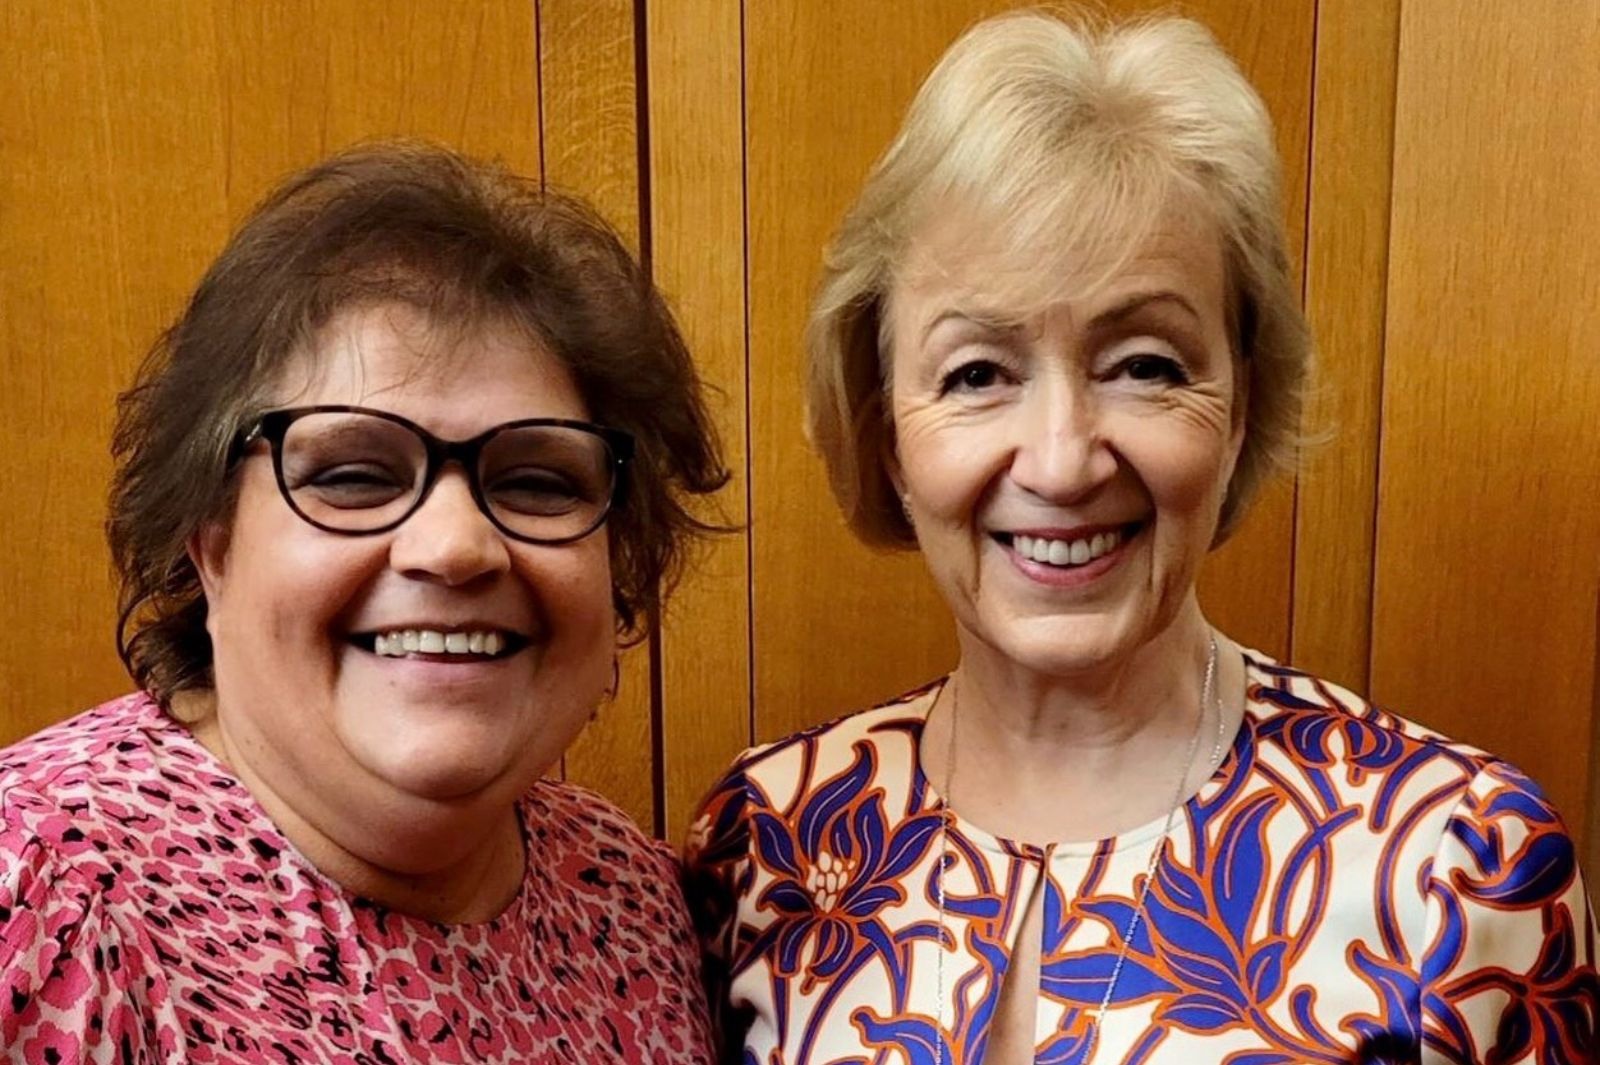 Professor Eunice Lumsden and the Rt Hon Andrea Leadsom.